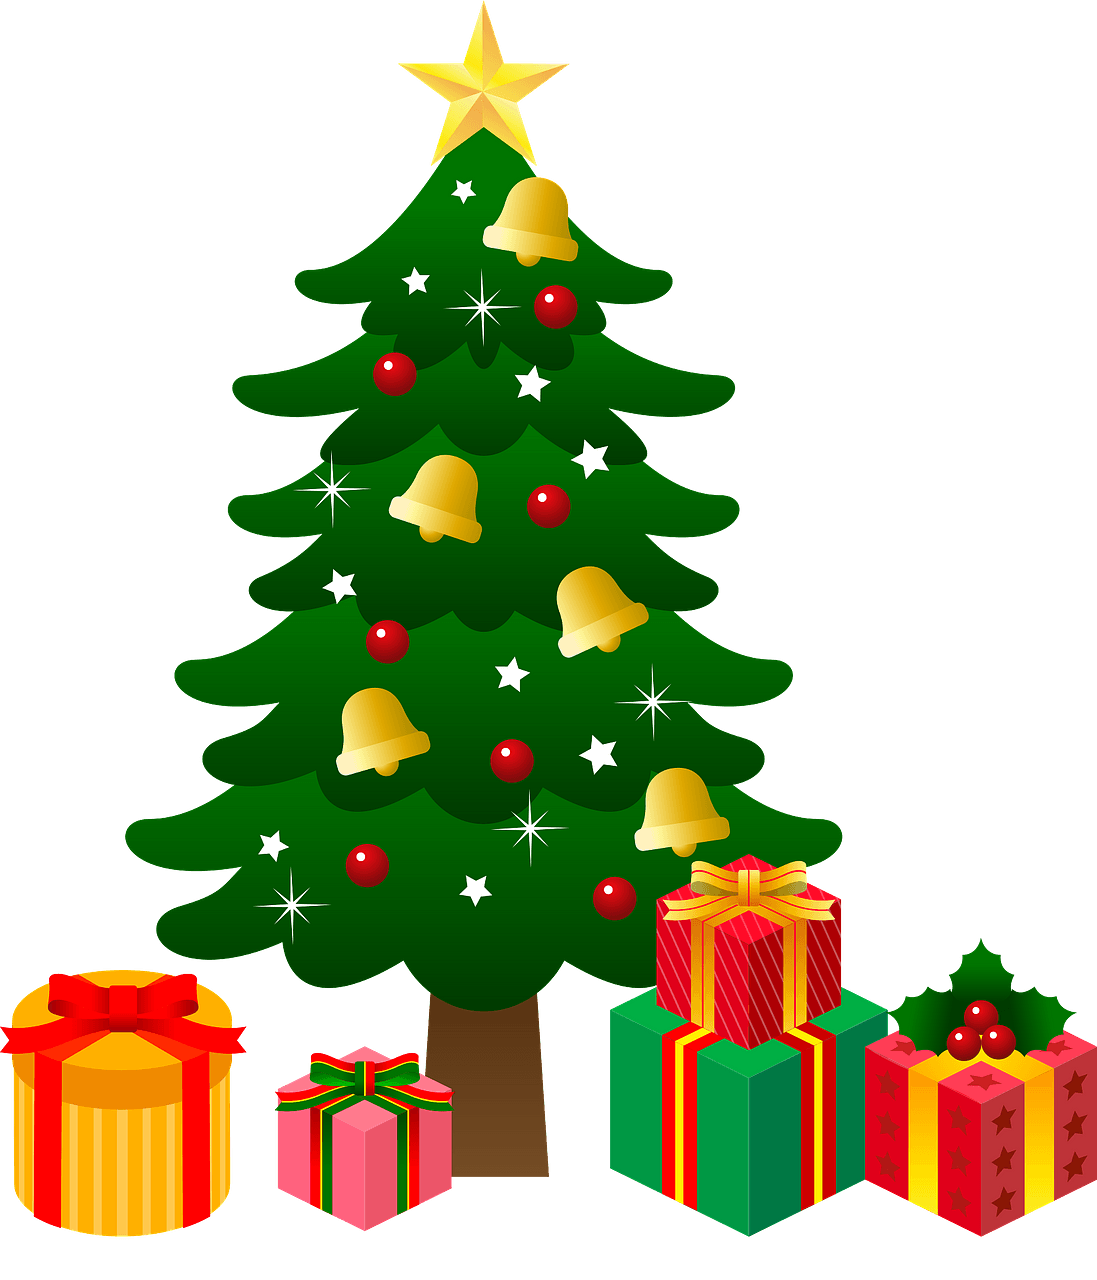 Free Christmas Tree With Presents Clipart, Download Free